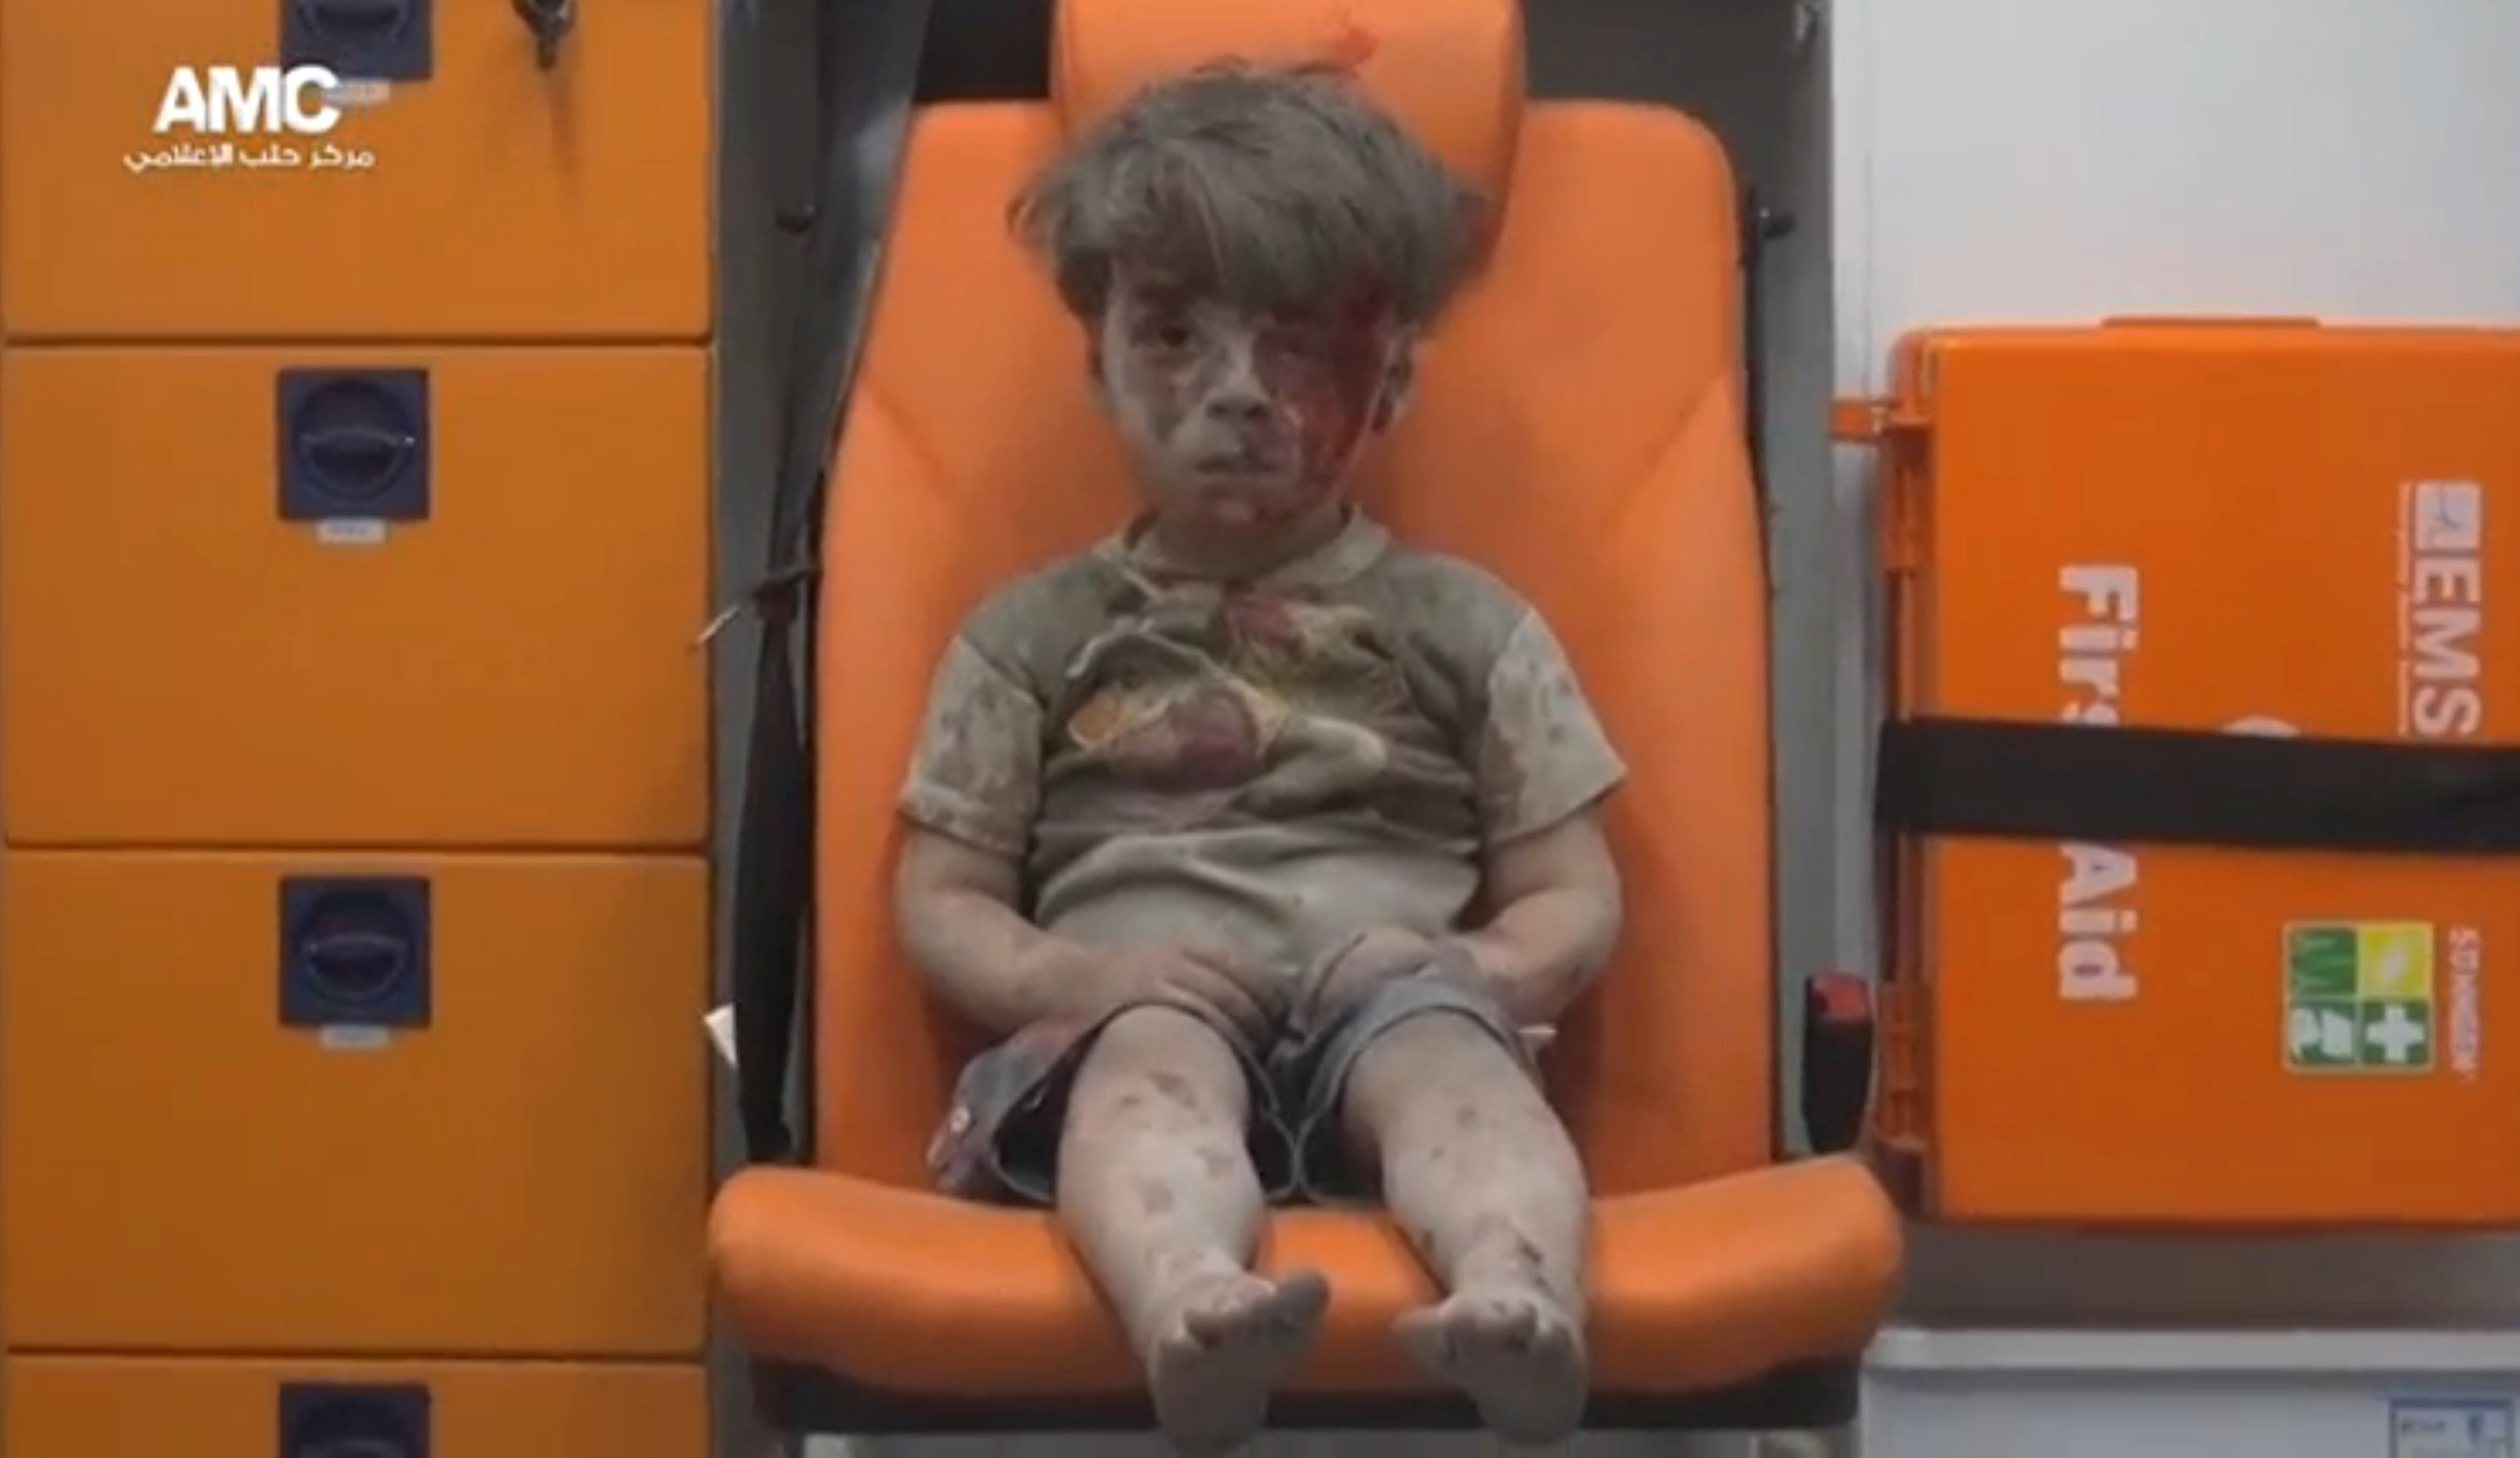 Heartbreaking photo of injured Syrian child shows human cost of war